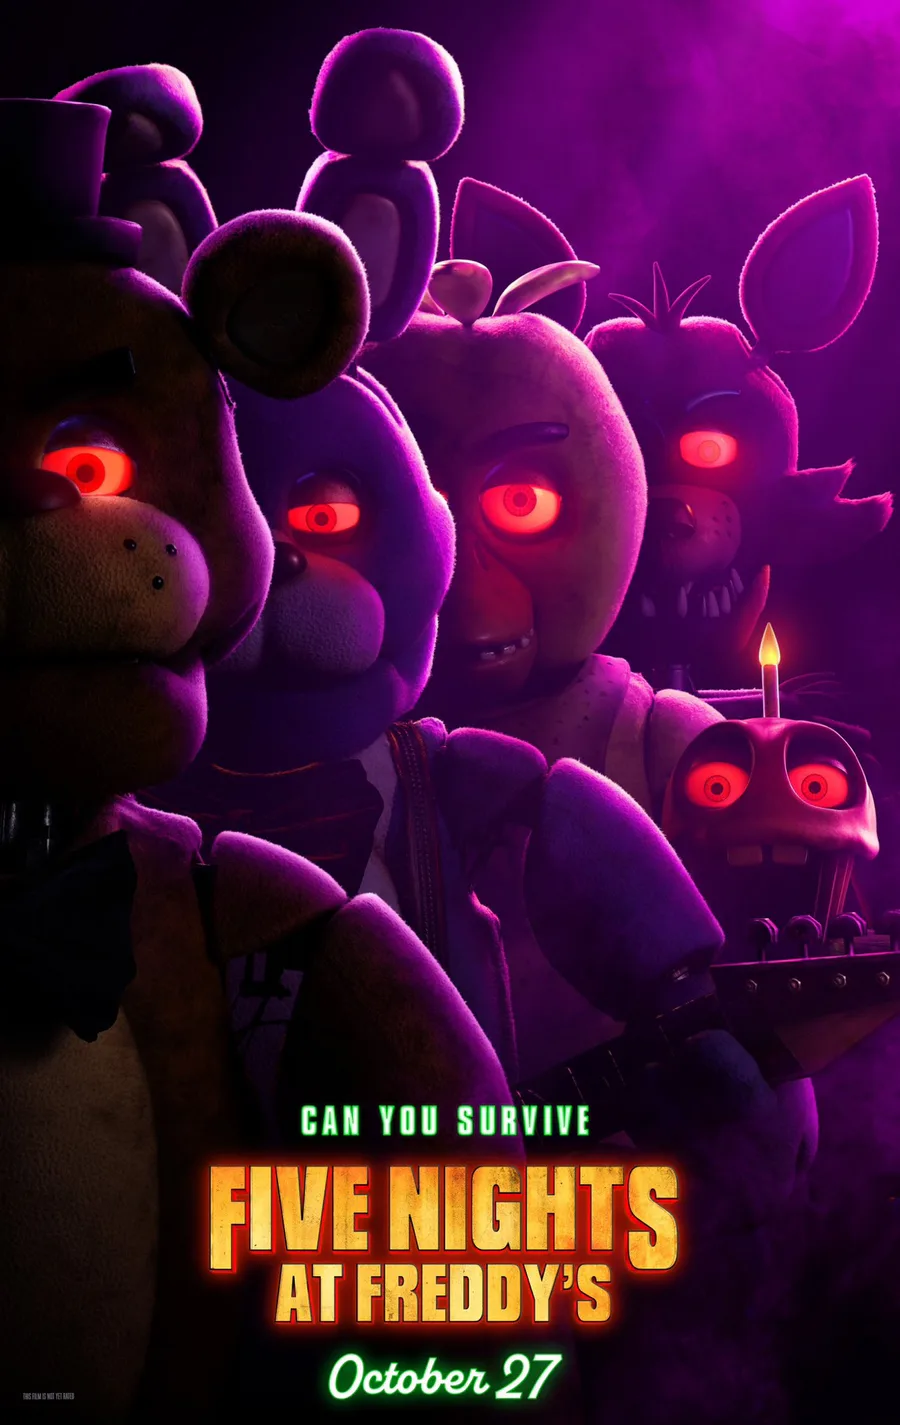 Bluesteel on X: THE JOY OF CREATION (Based on the Fnaf movie poster, I am  very excited for the movie :] ) #FNAF #fivenightsatfreddys #fnafmovie #tjoc  #thejoyofcreation  / X